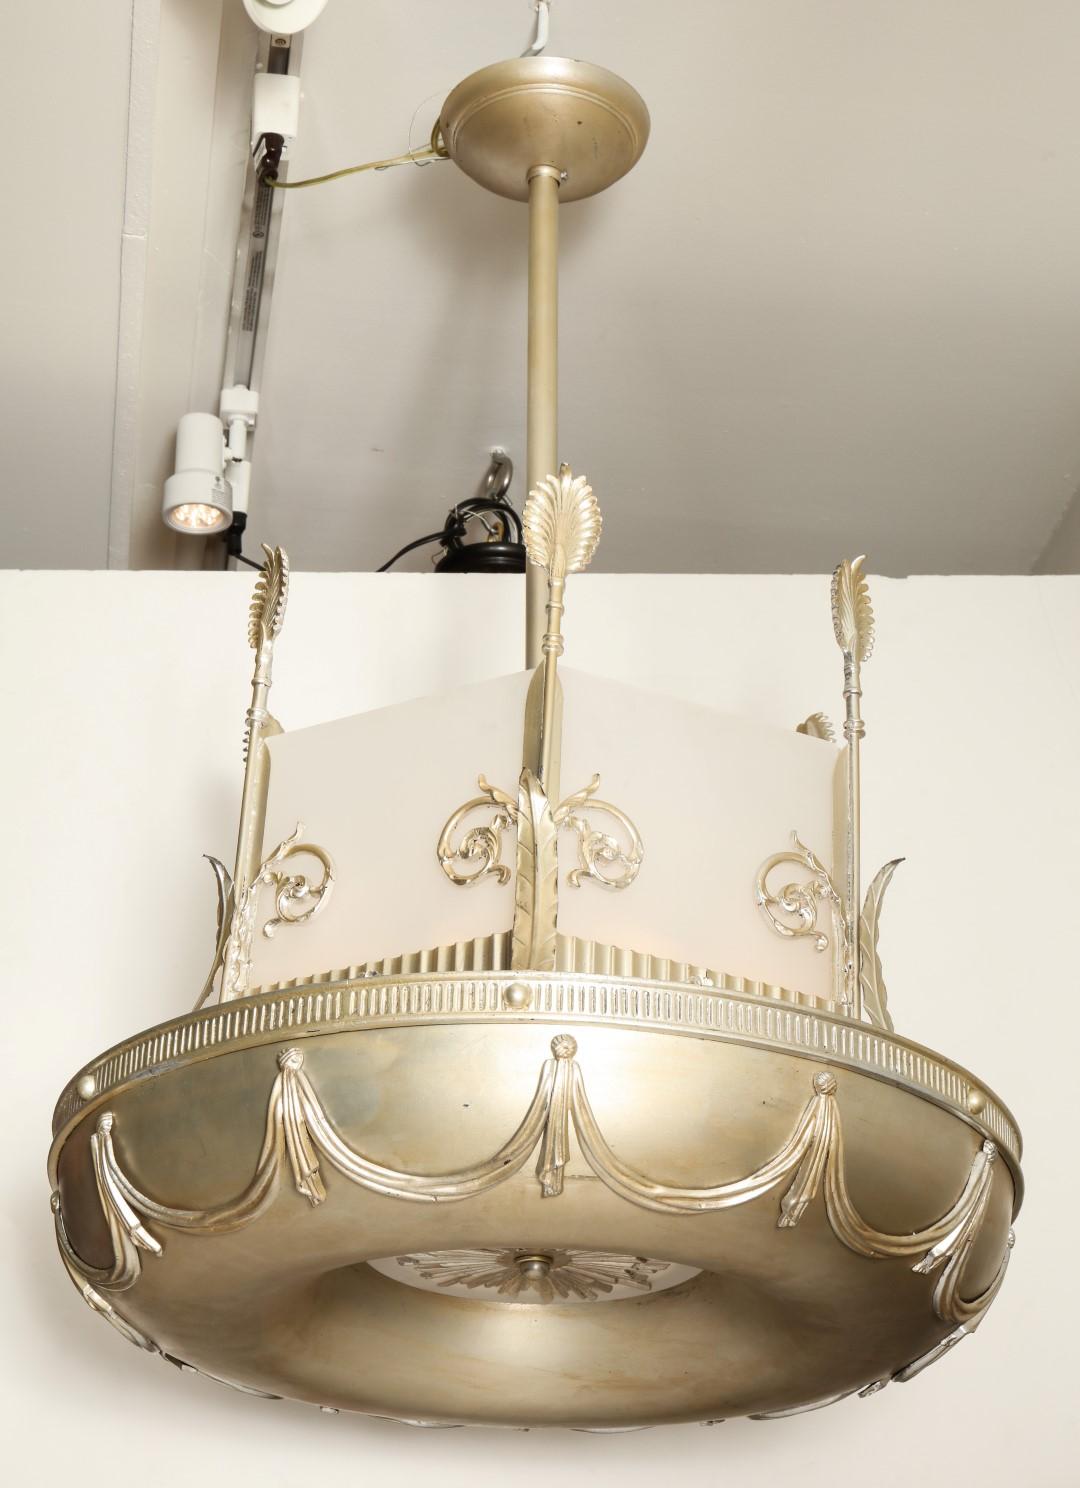 A pair of antiqued silver-leaf Art Deco chandeliers with a torus shaped frame and swag motifs. American, circa 1930s. Chandeliers feature glass panels around the top and a cast starburst shaped element on the underside with a piece of round frosted